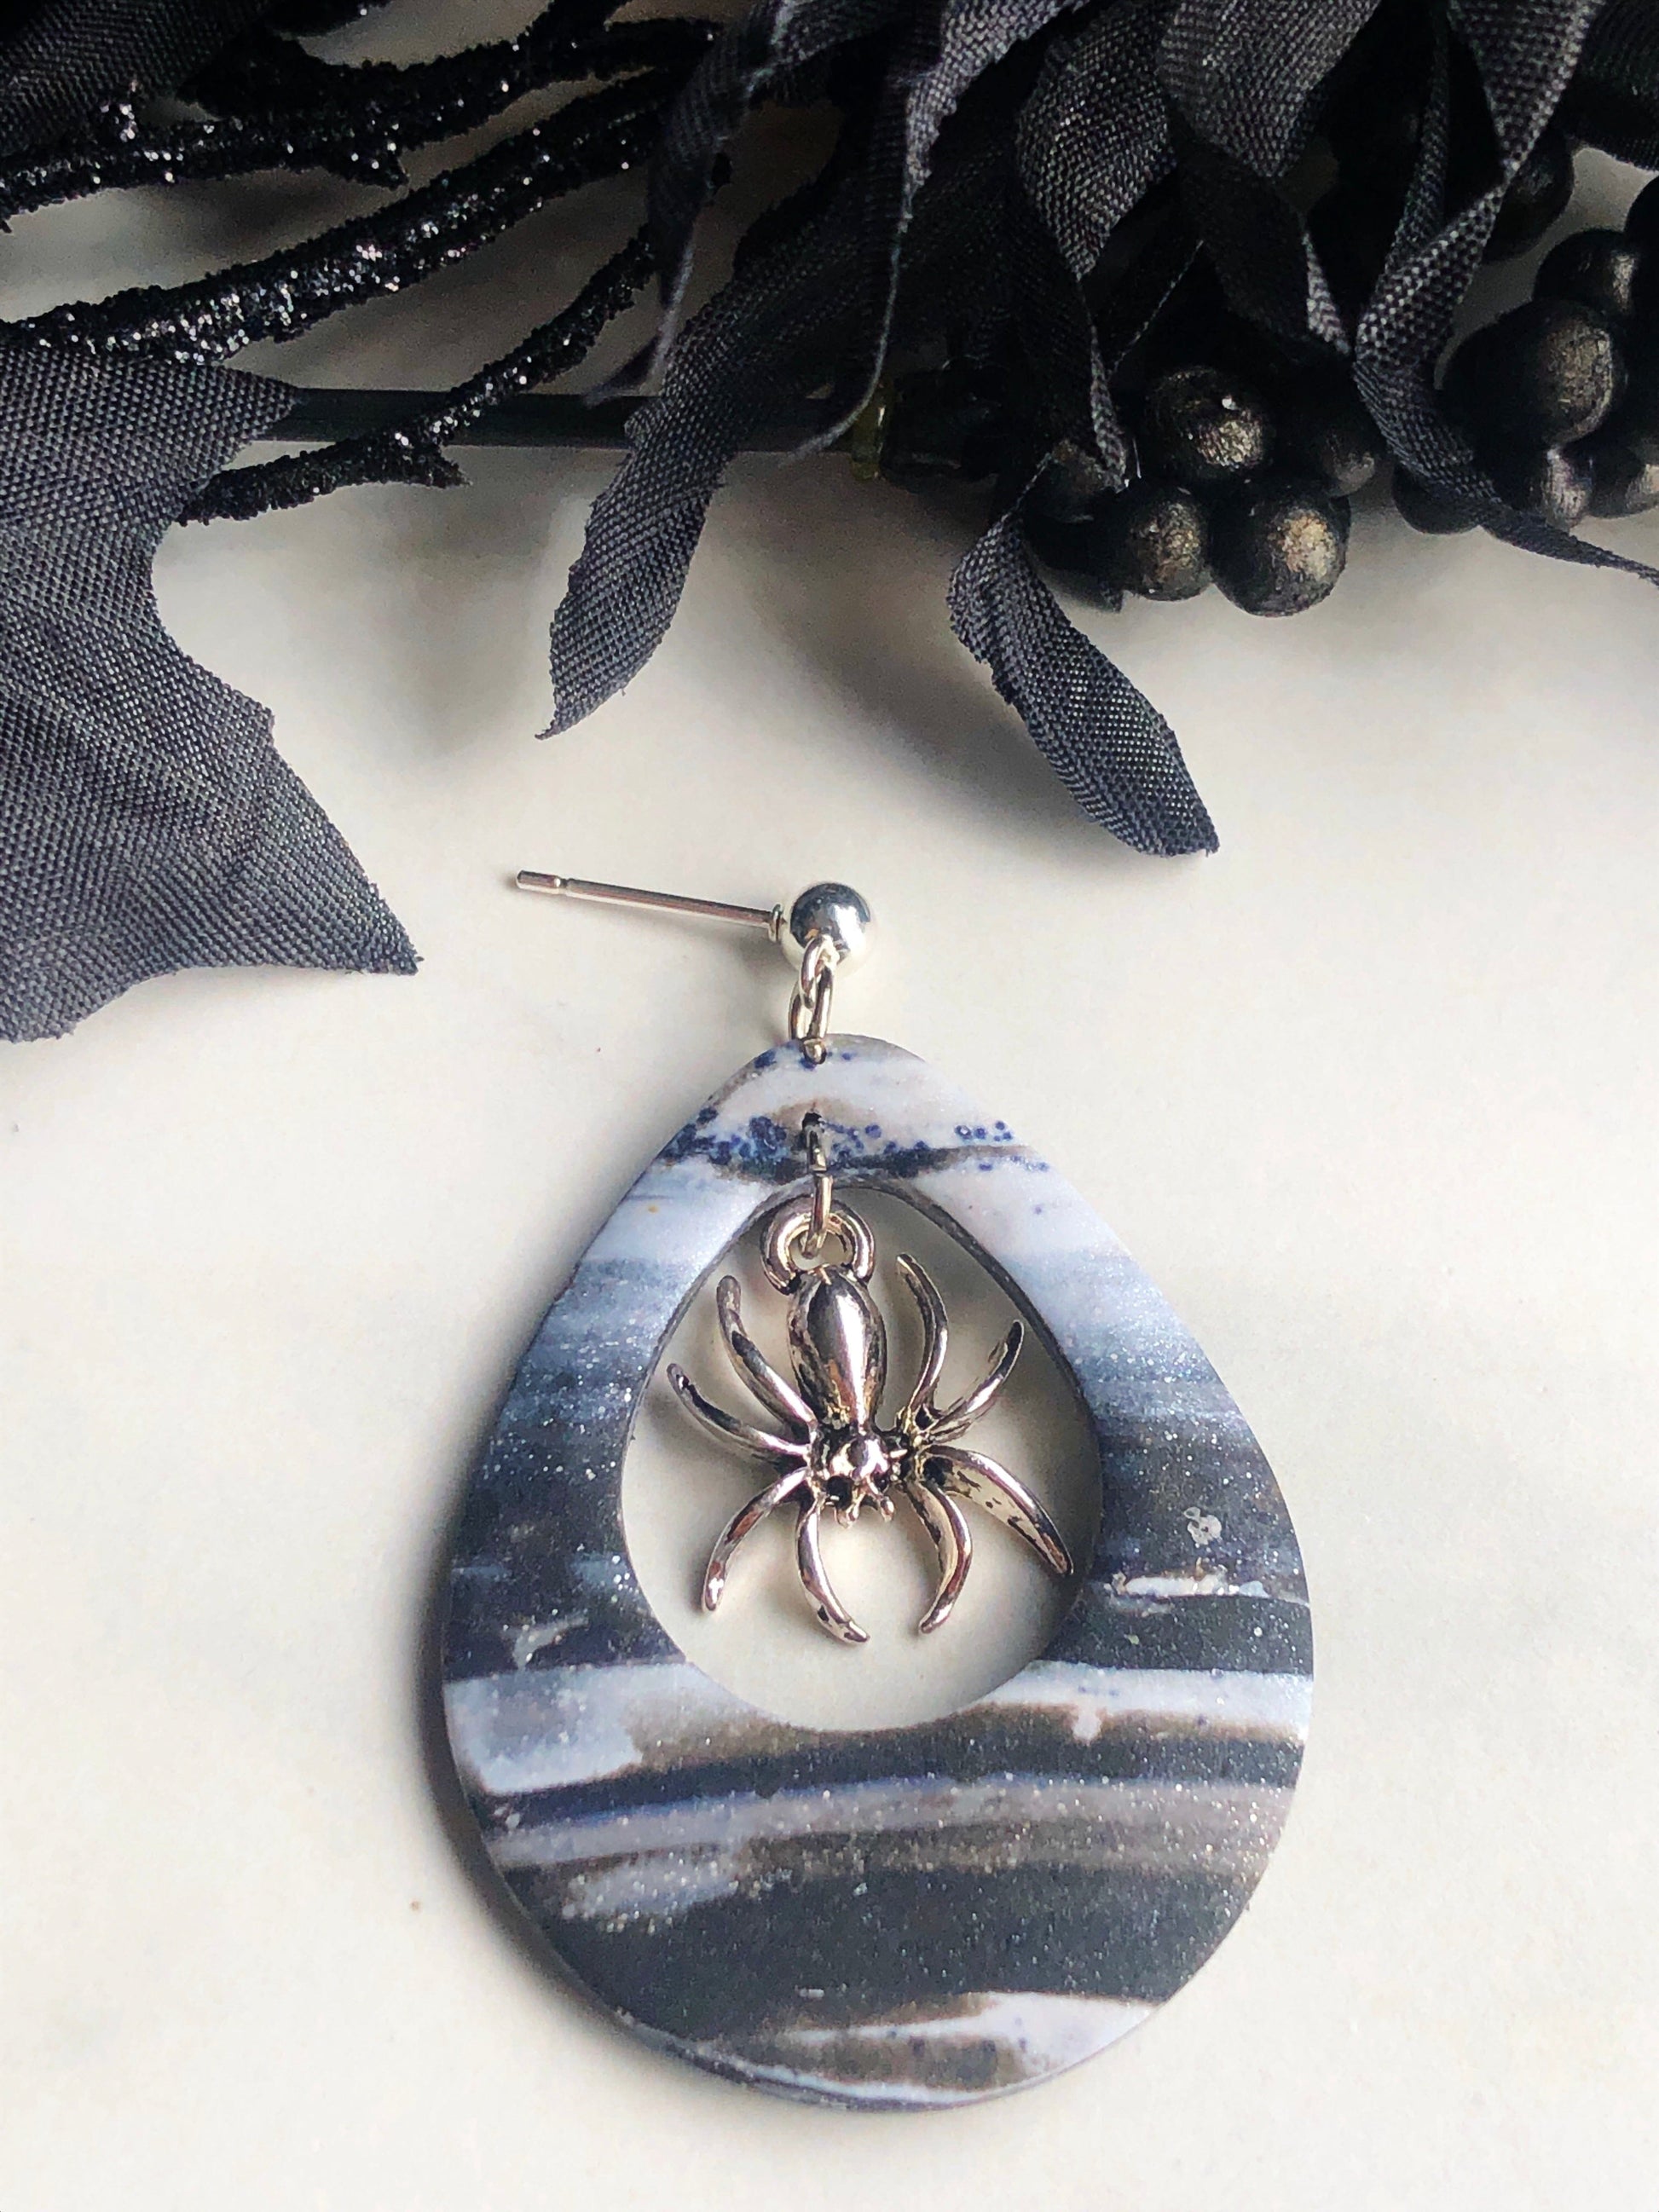 Earrings Arana - Marbled Grey/White Clay Teardrops with Spider Charm